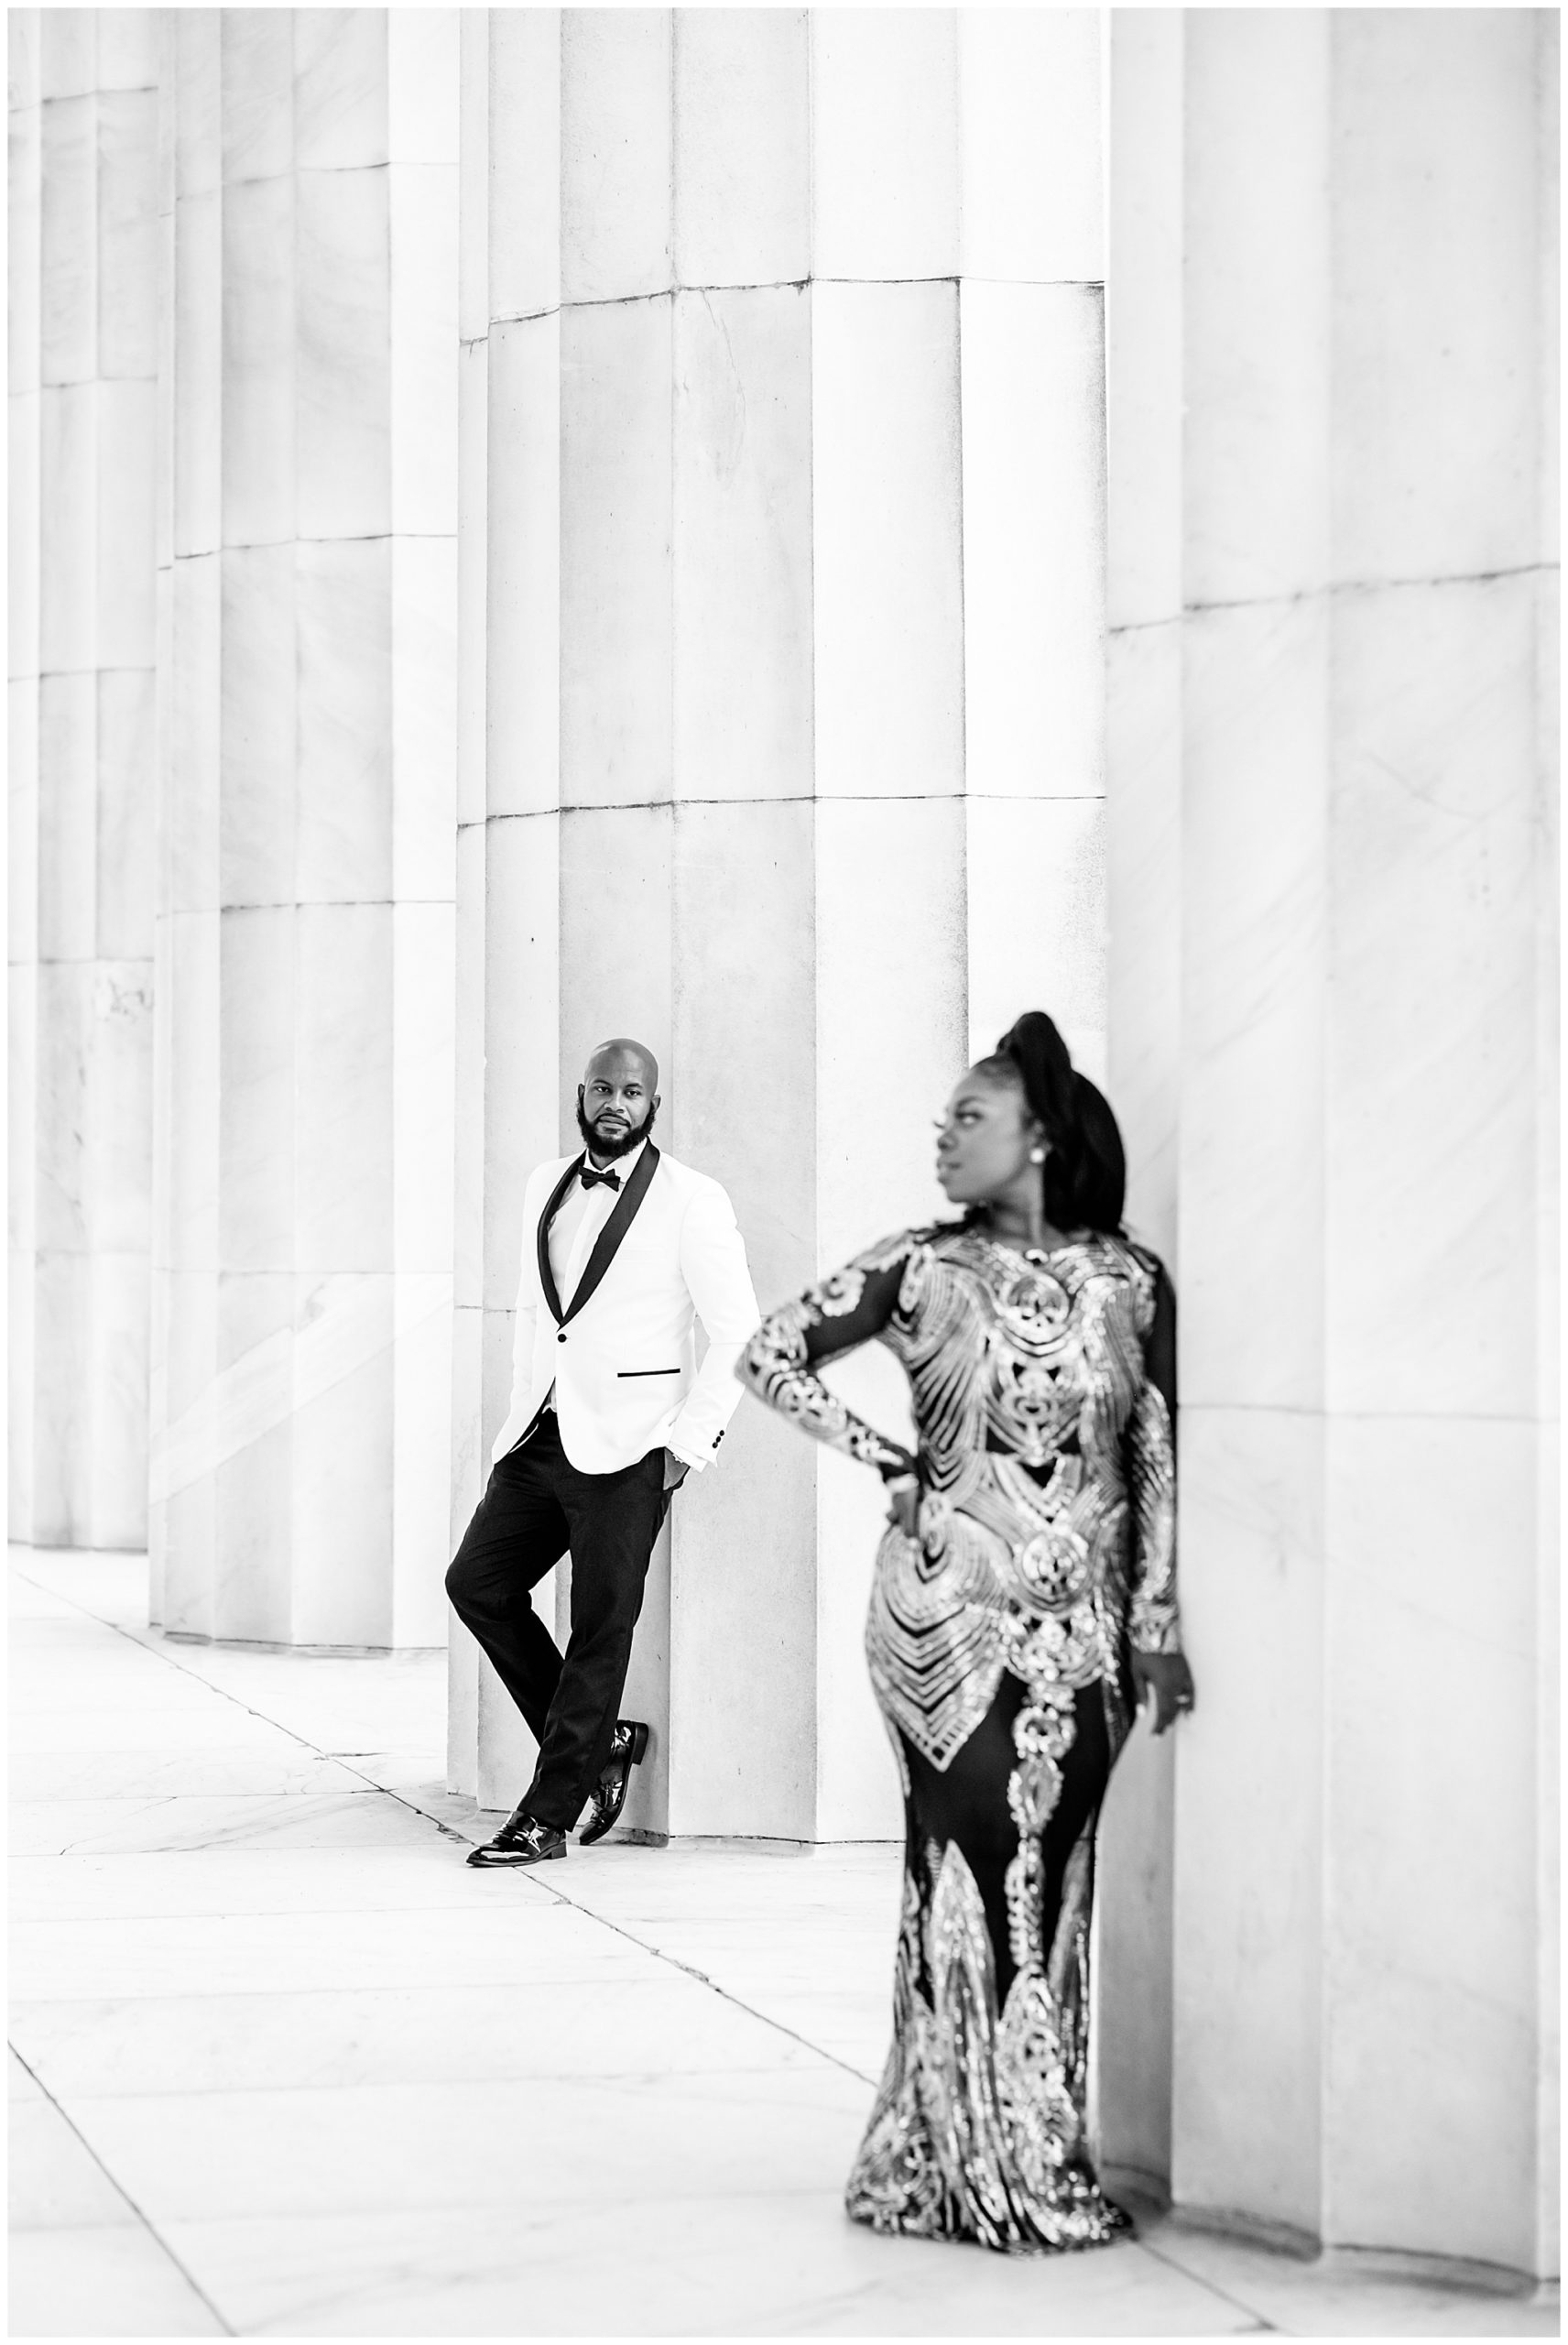 formal DC engagement photos, Washington DC engagement photos, DC engagement photographer, DC portraits, summer engagement portraits, formal engagement photos, formal portraits, Rachel E.H. Photography, engaged couple in Lincoln Memorial, black and white